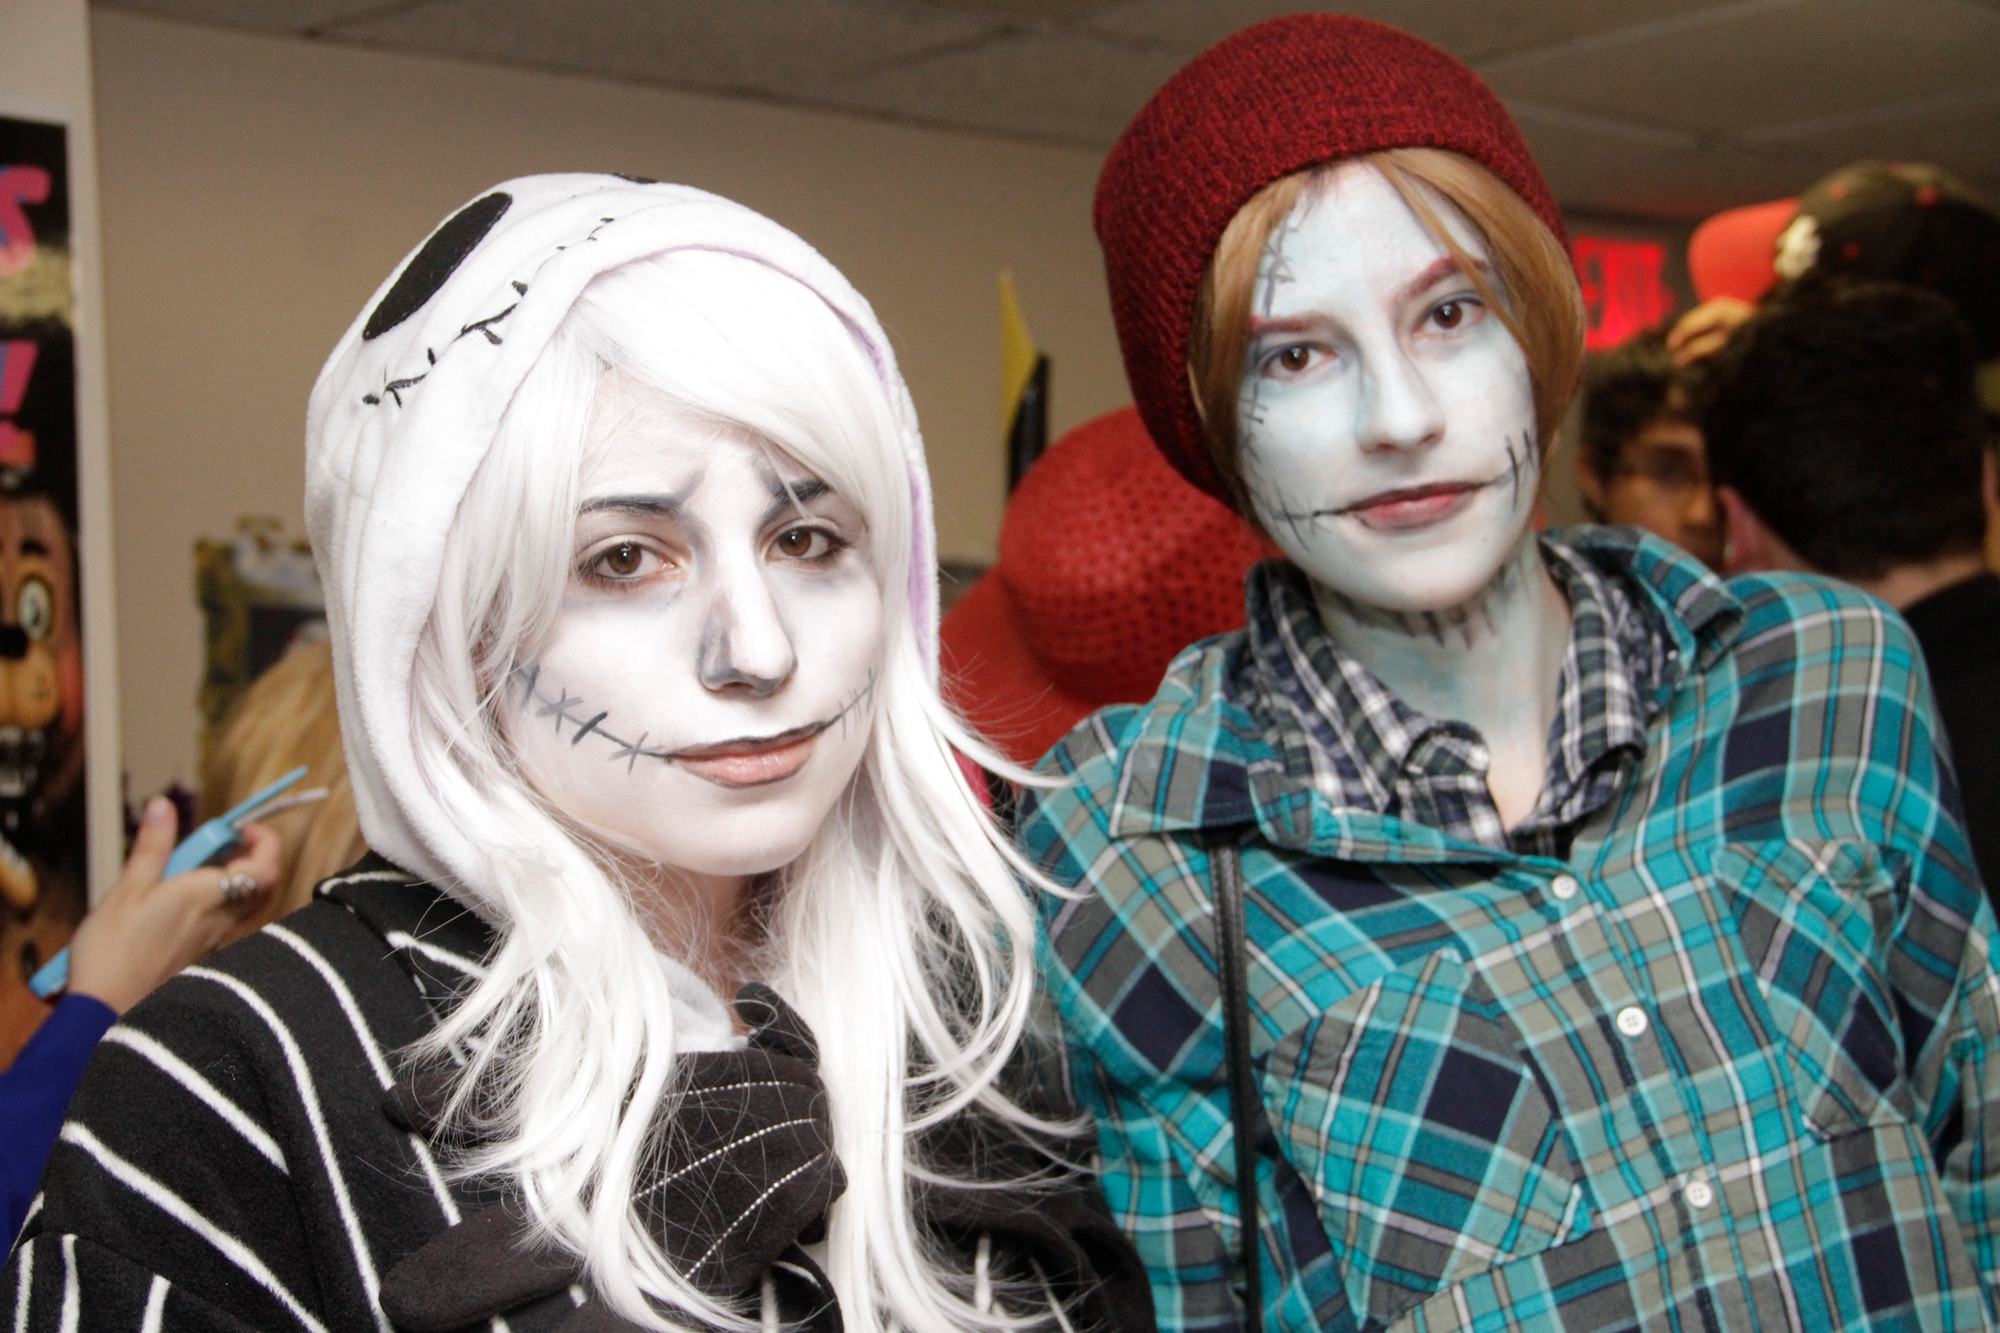 Gianna Giaquinto and Julia Riwaldi were some of the many creative people who participated in Anime Fest.